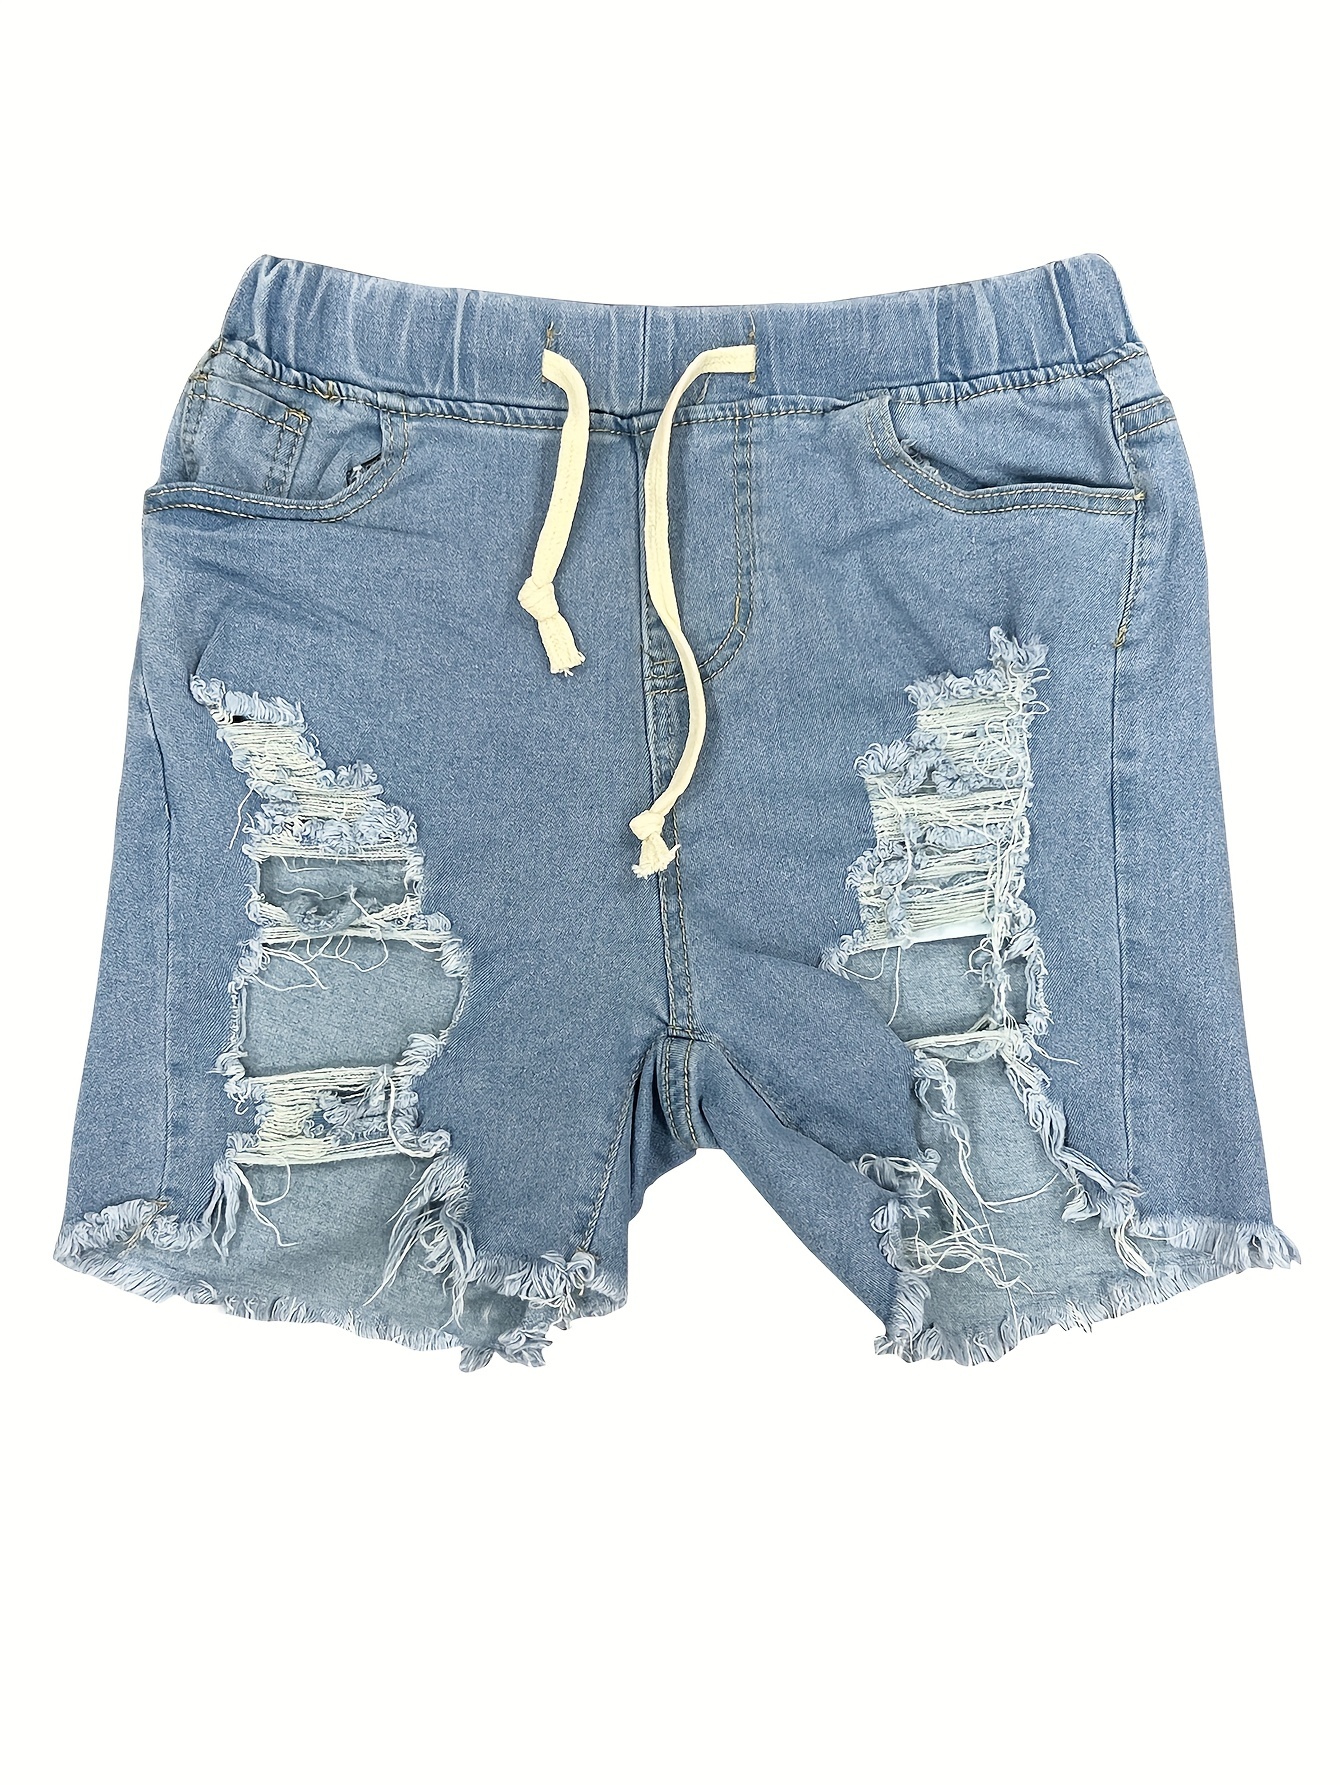 Buy Women's Summer Denim Shorts Casual Short Jeans 5 Style Ripped